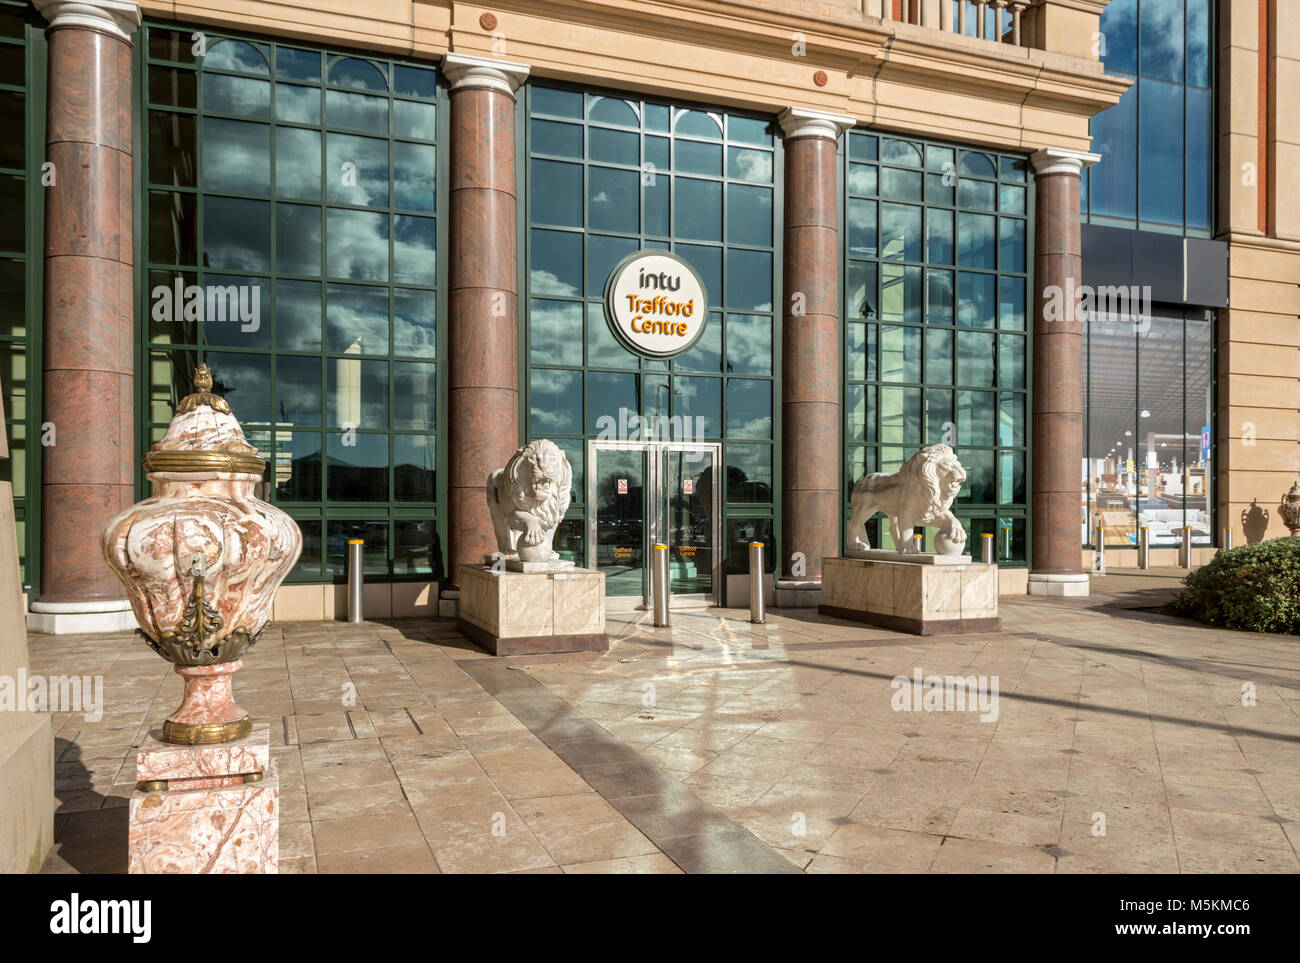 Vase and lion sculptures at the entrance to Barton Square at the intu Trafford Centre, Manchester, UK Stock Photo